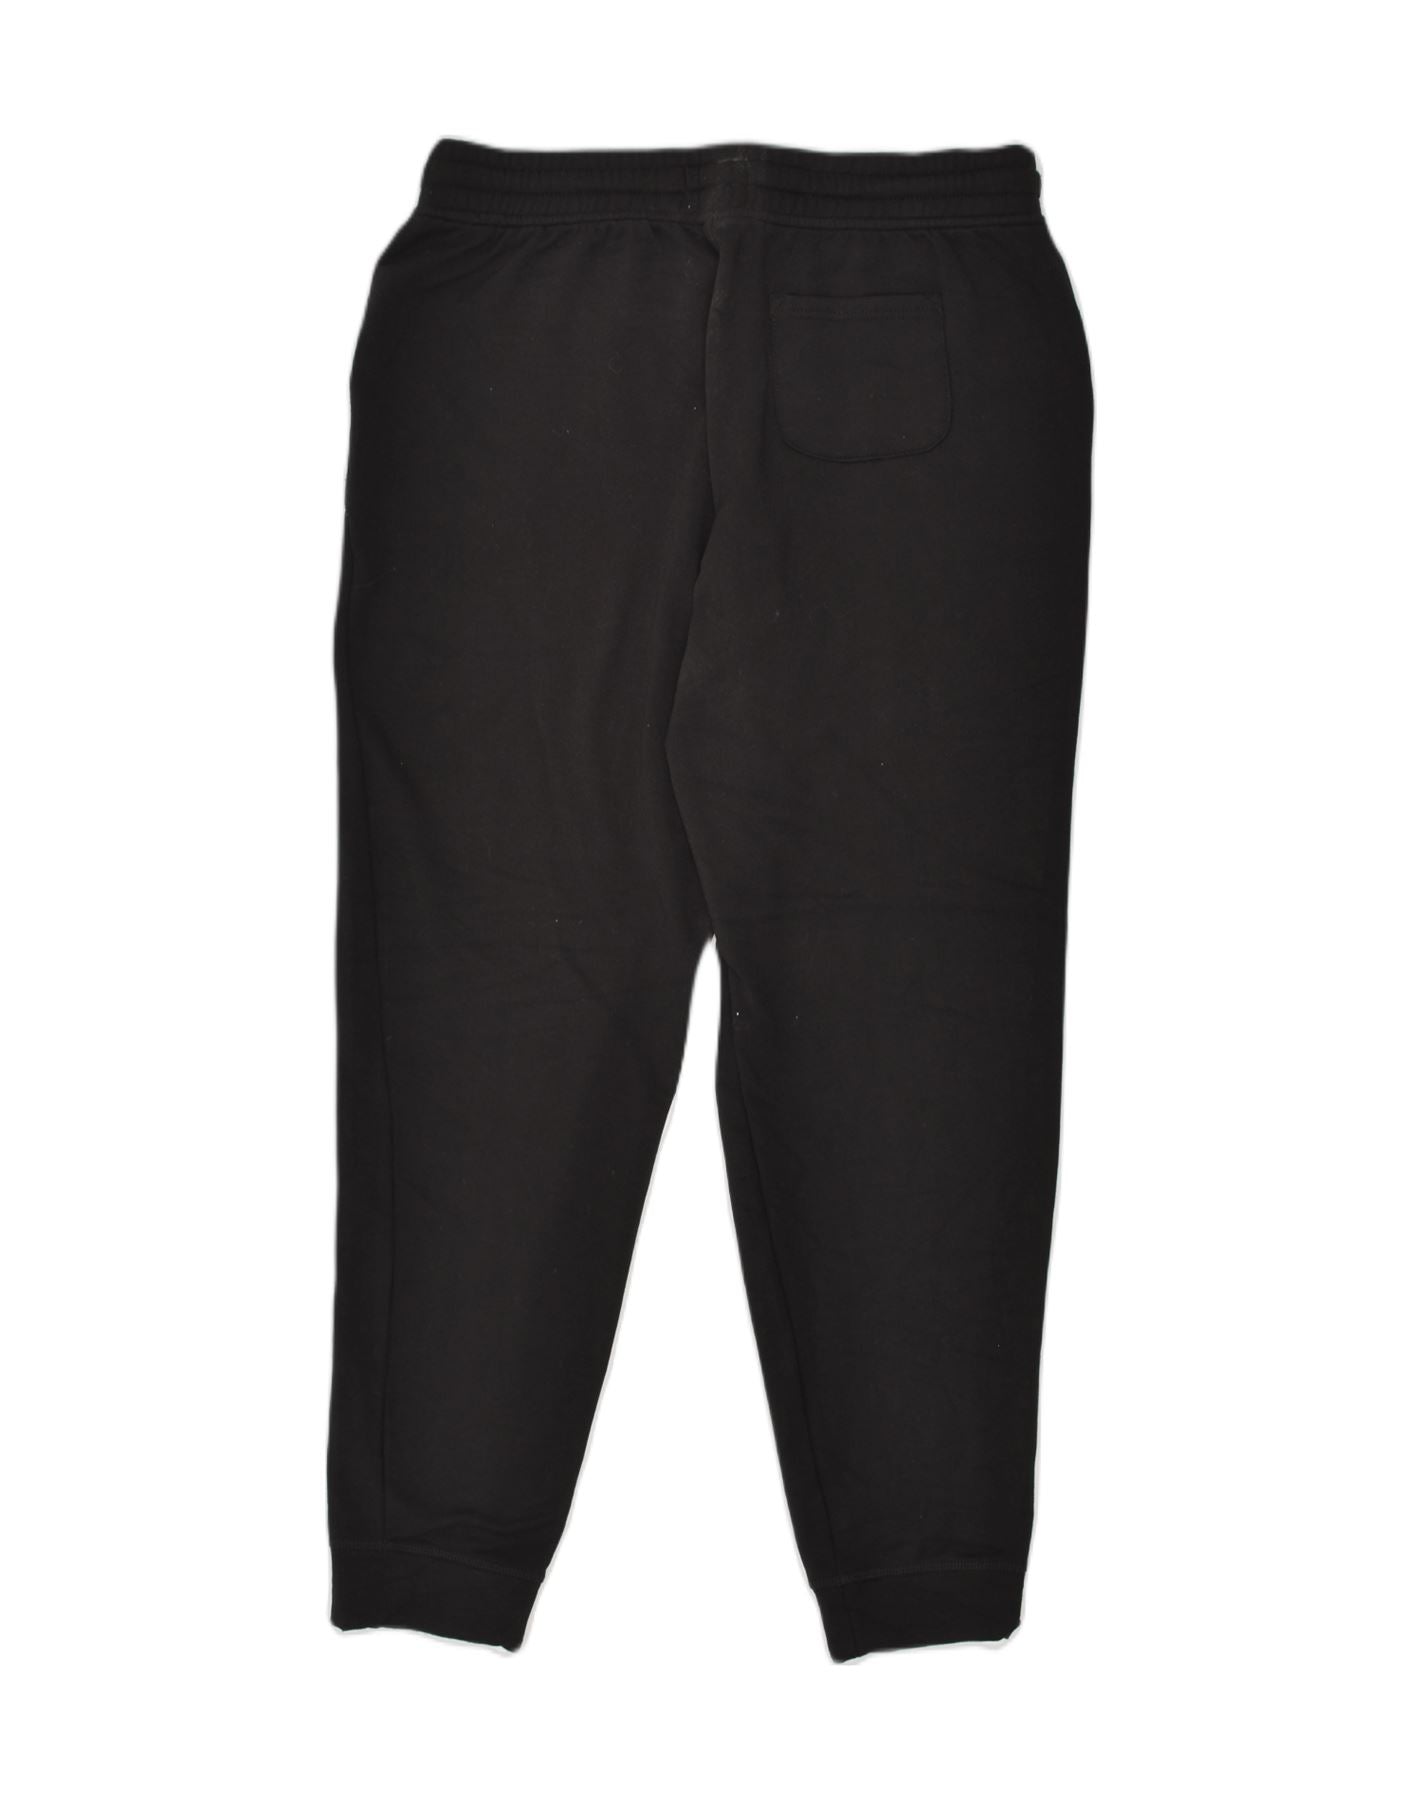 FAT FACE Womens Tracksuit Trousers Joggers UK 10 Small Black Viscose, Vintage & Second-Hand Clothing Online